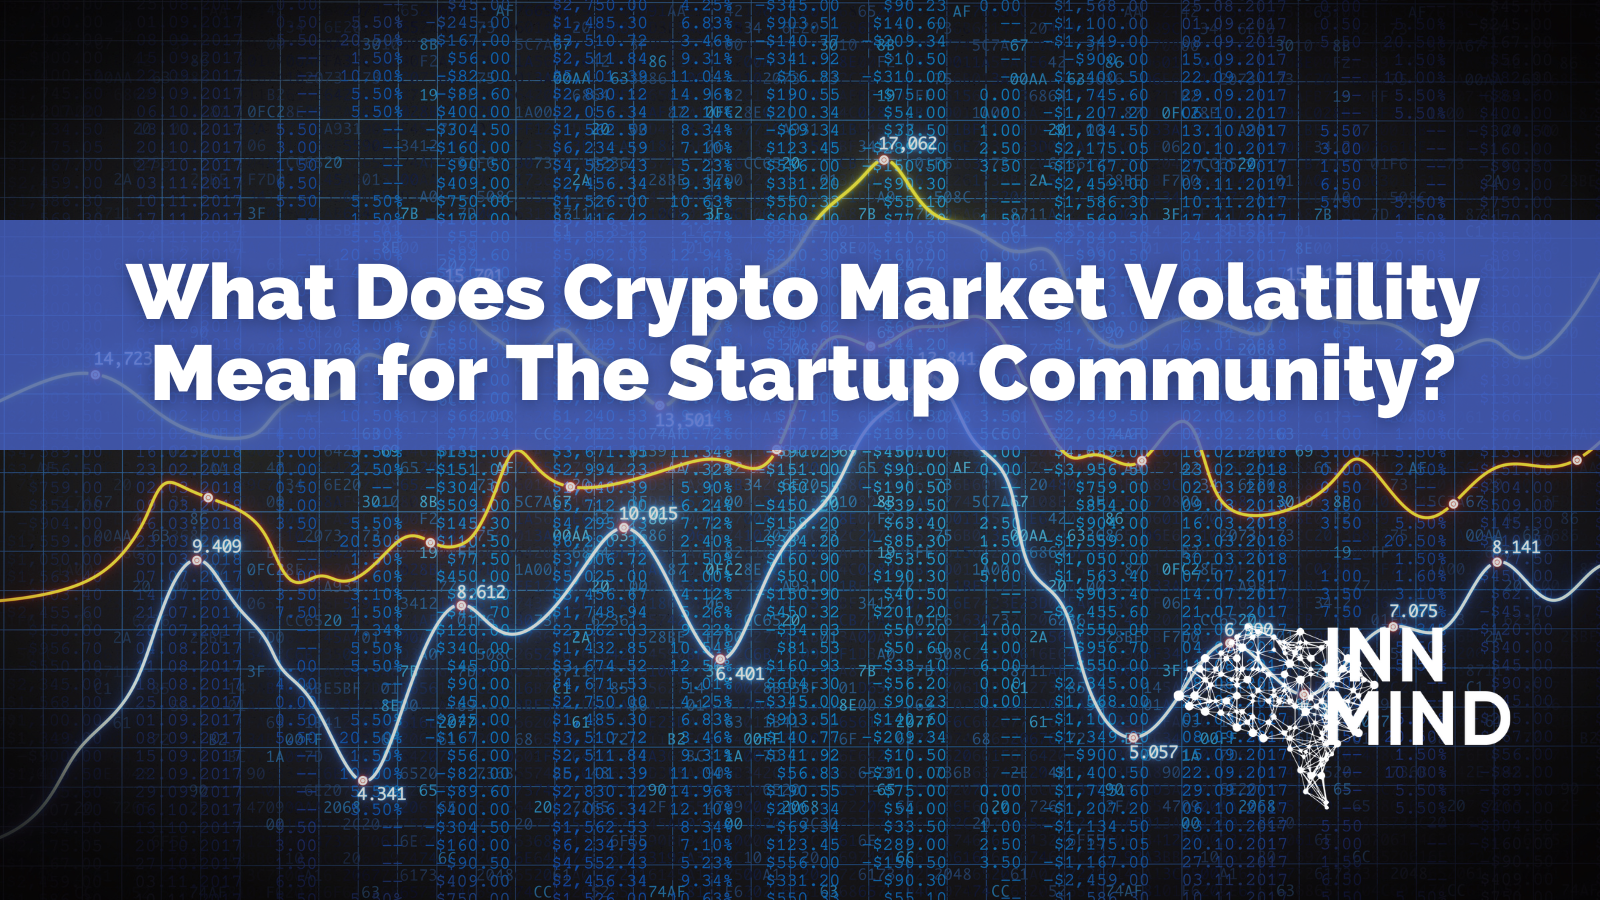 What Does Crypto Market Volatility Mean for The Startup Community?